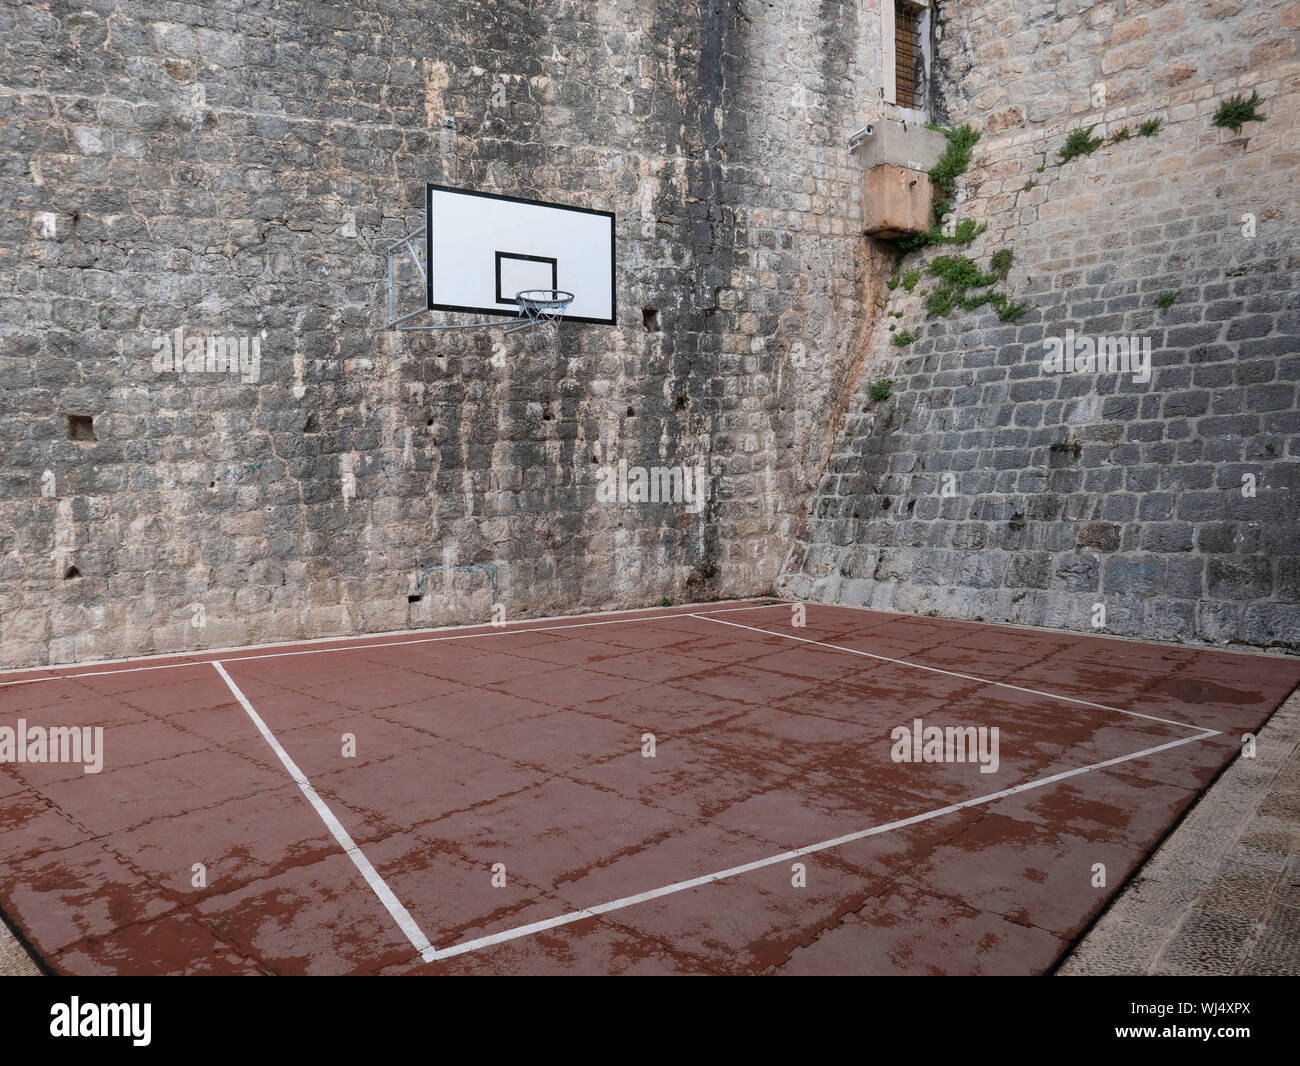 Basketball court and hoop in stone courtyard Stock Photo